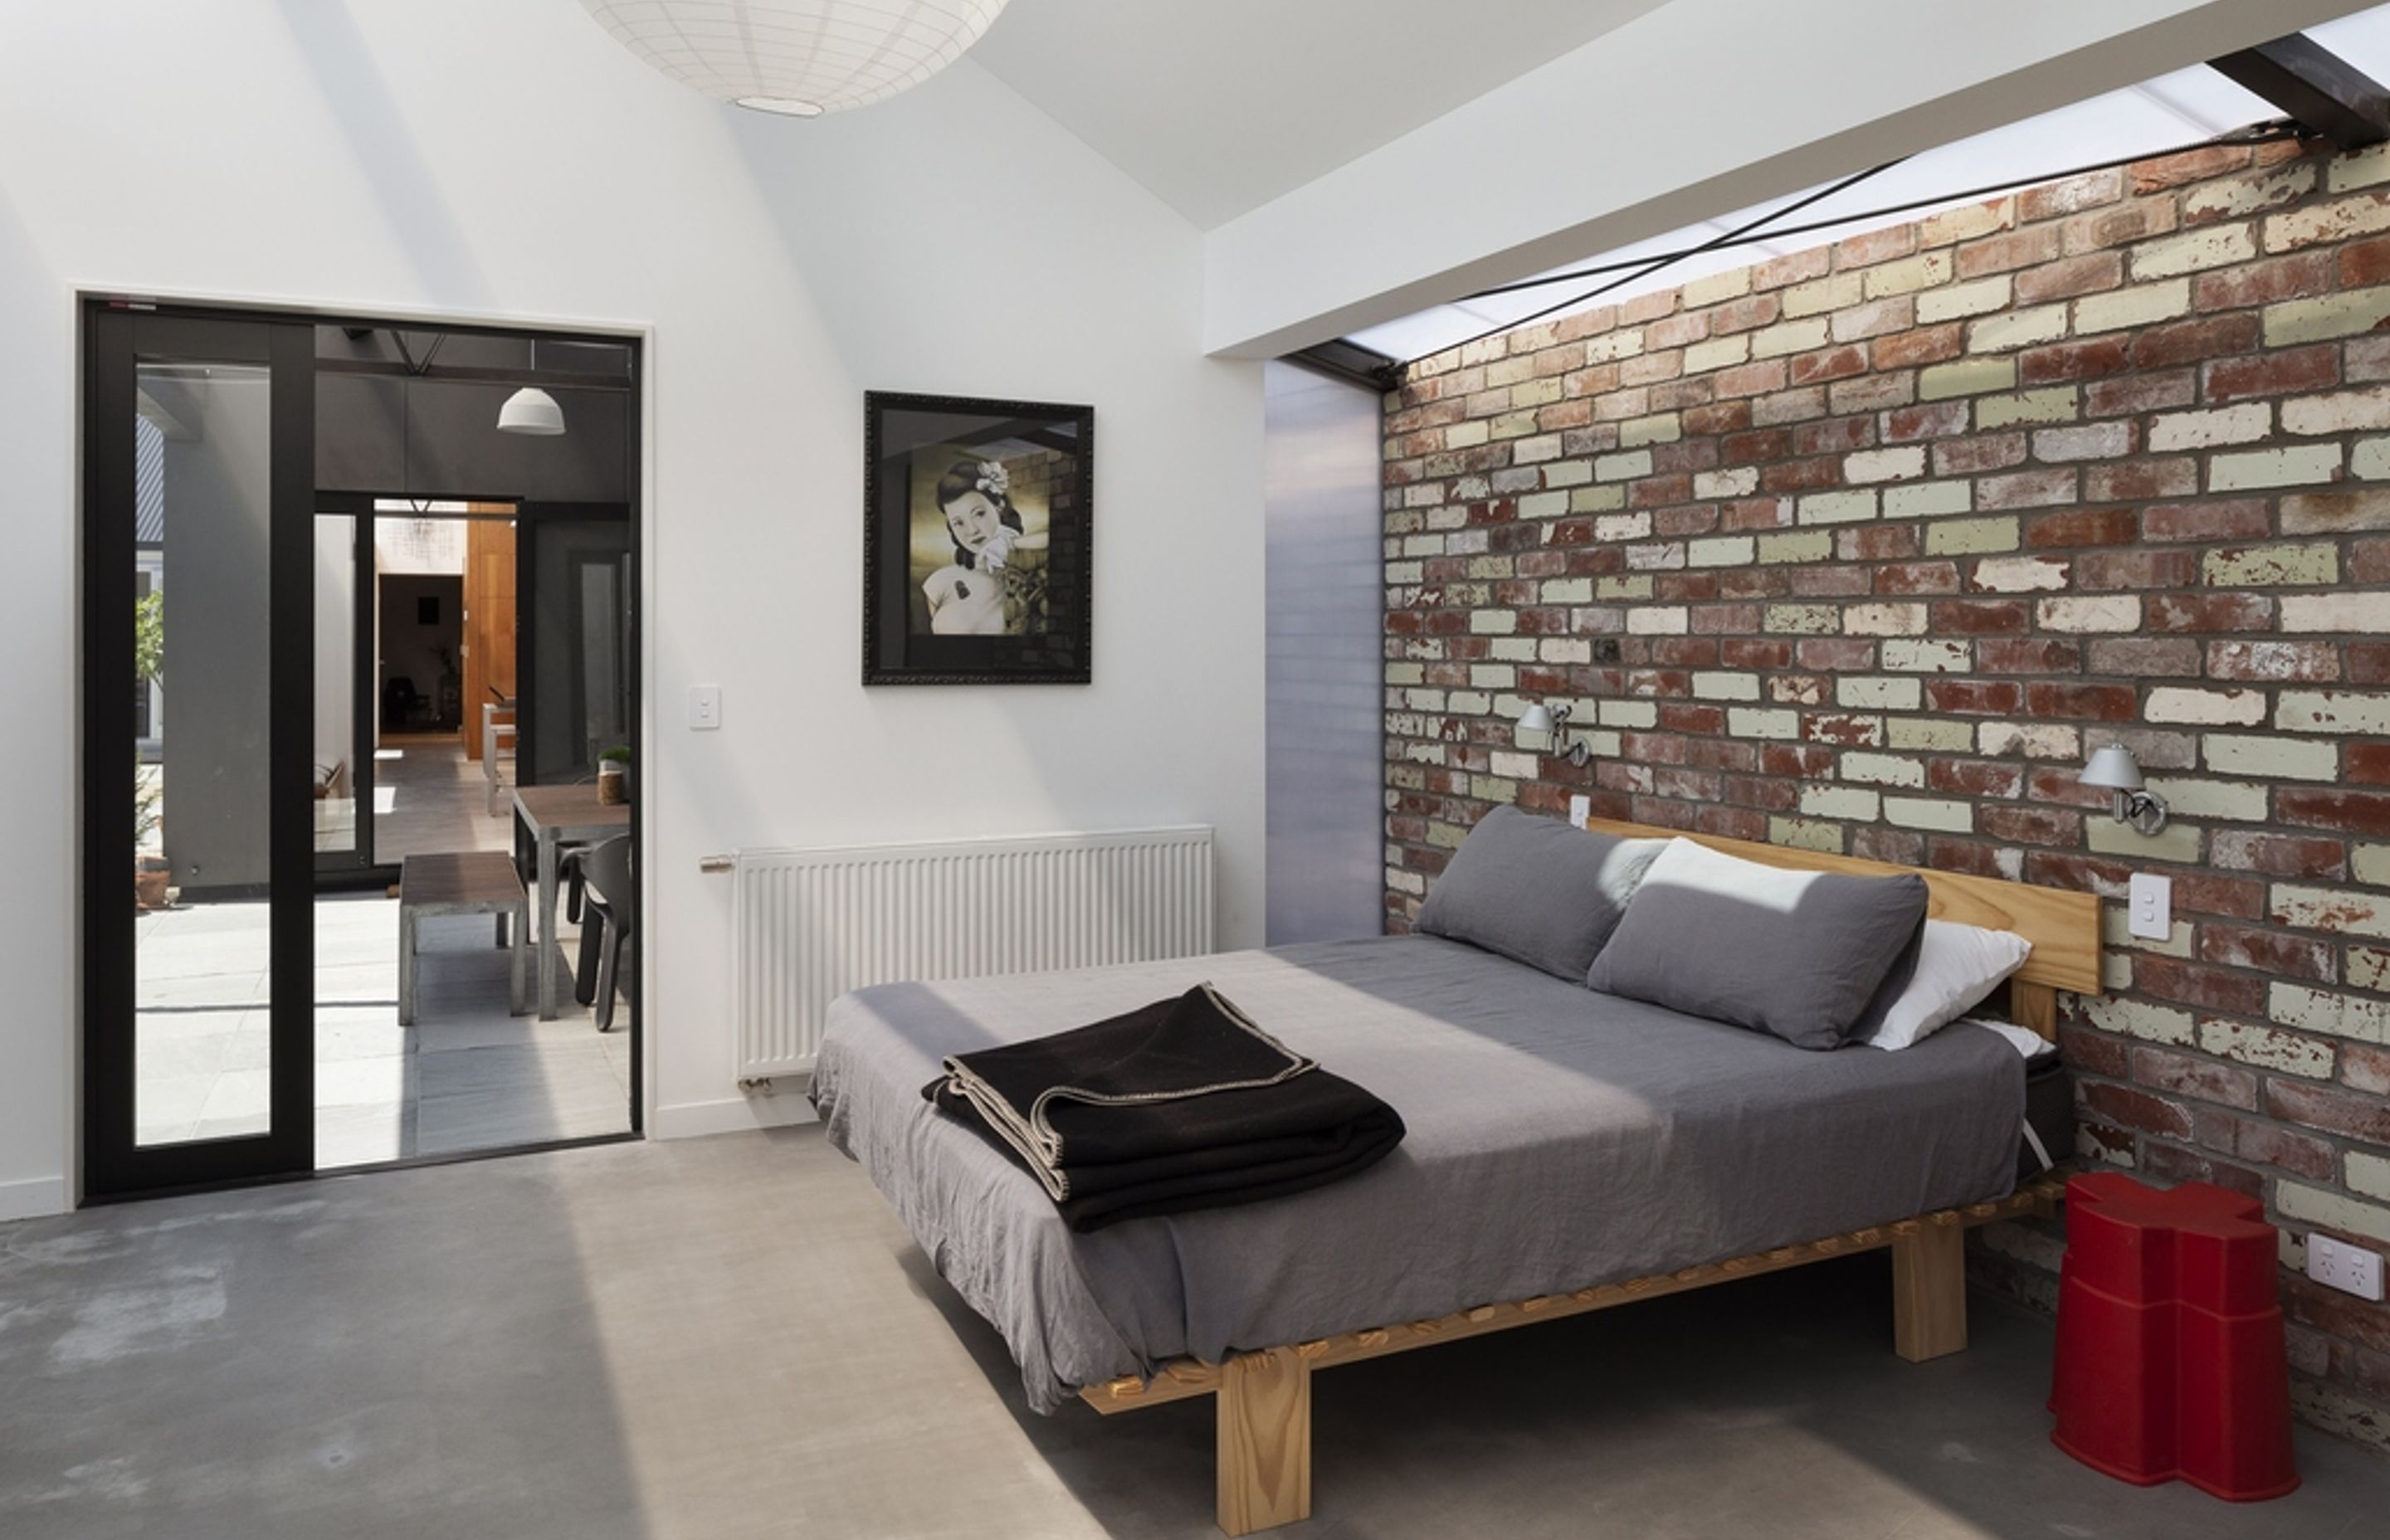 A long, narrow strip of polycarbonate roofing draws soft, diffused light into the bedroom, adding texture and interest to a recycled brick wall that runs the entire length of the new addition.